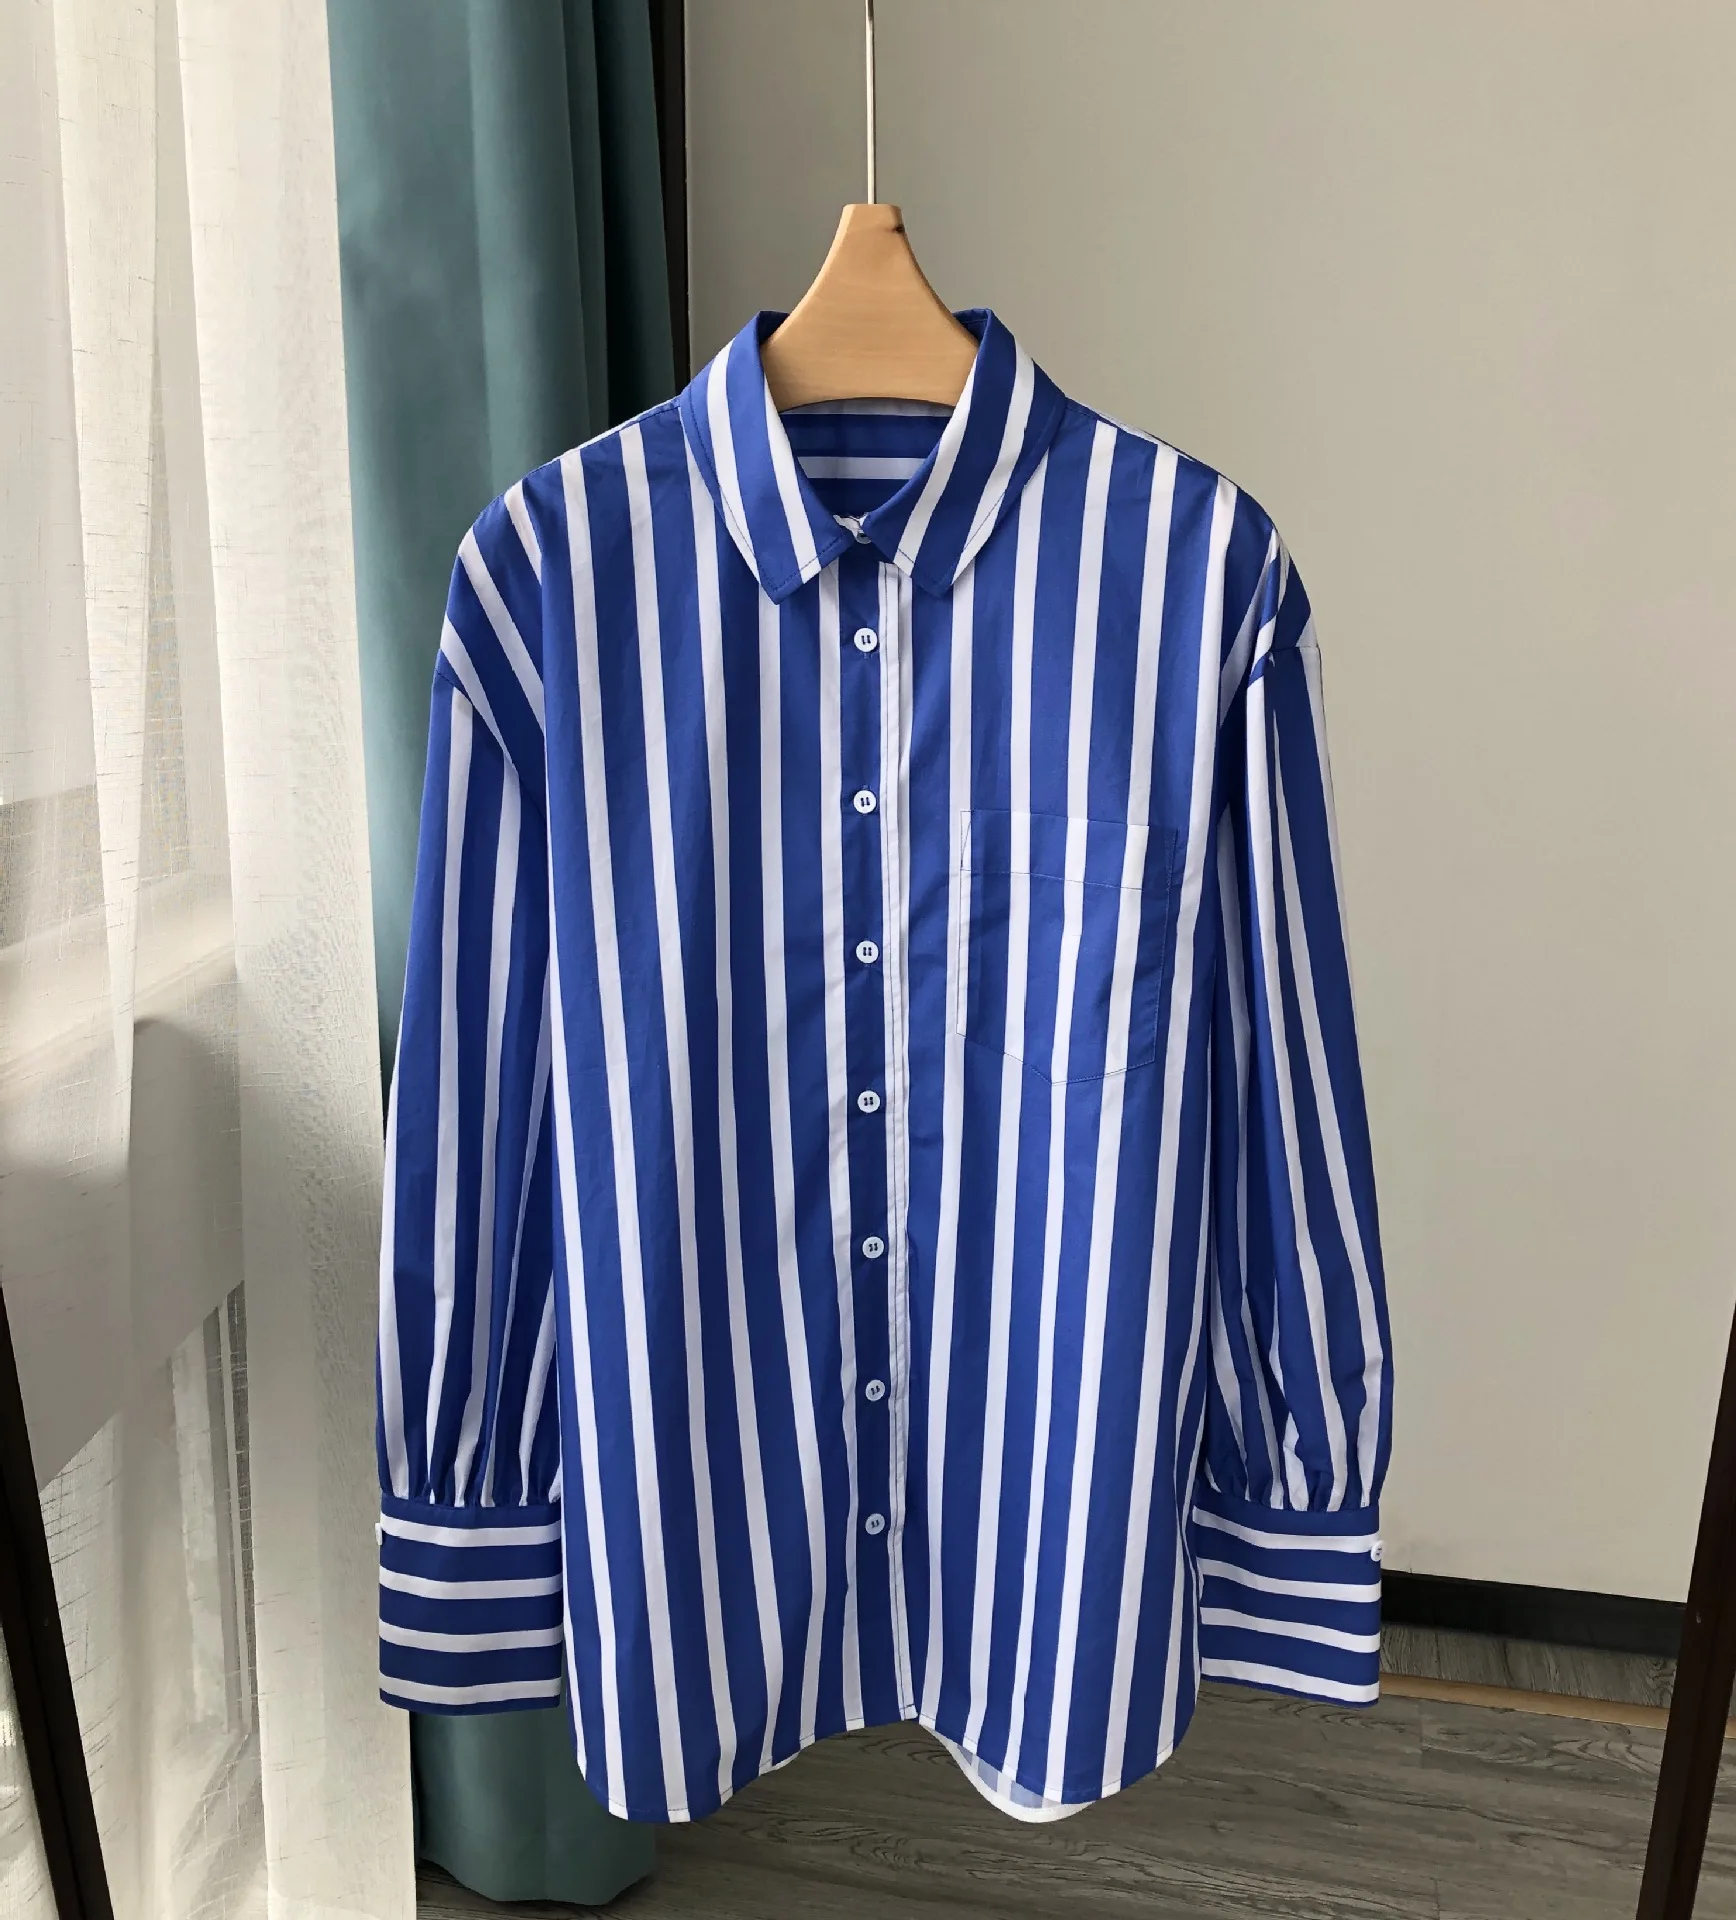 Vintage Autumn Embroidery 100% Cotton Long Sleeves Loose Clothes Womens Tops and Blouse Fashion Blue White Striped Shirt Female